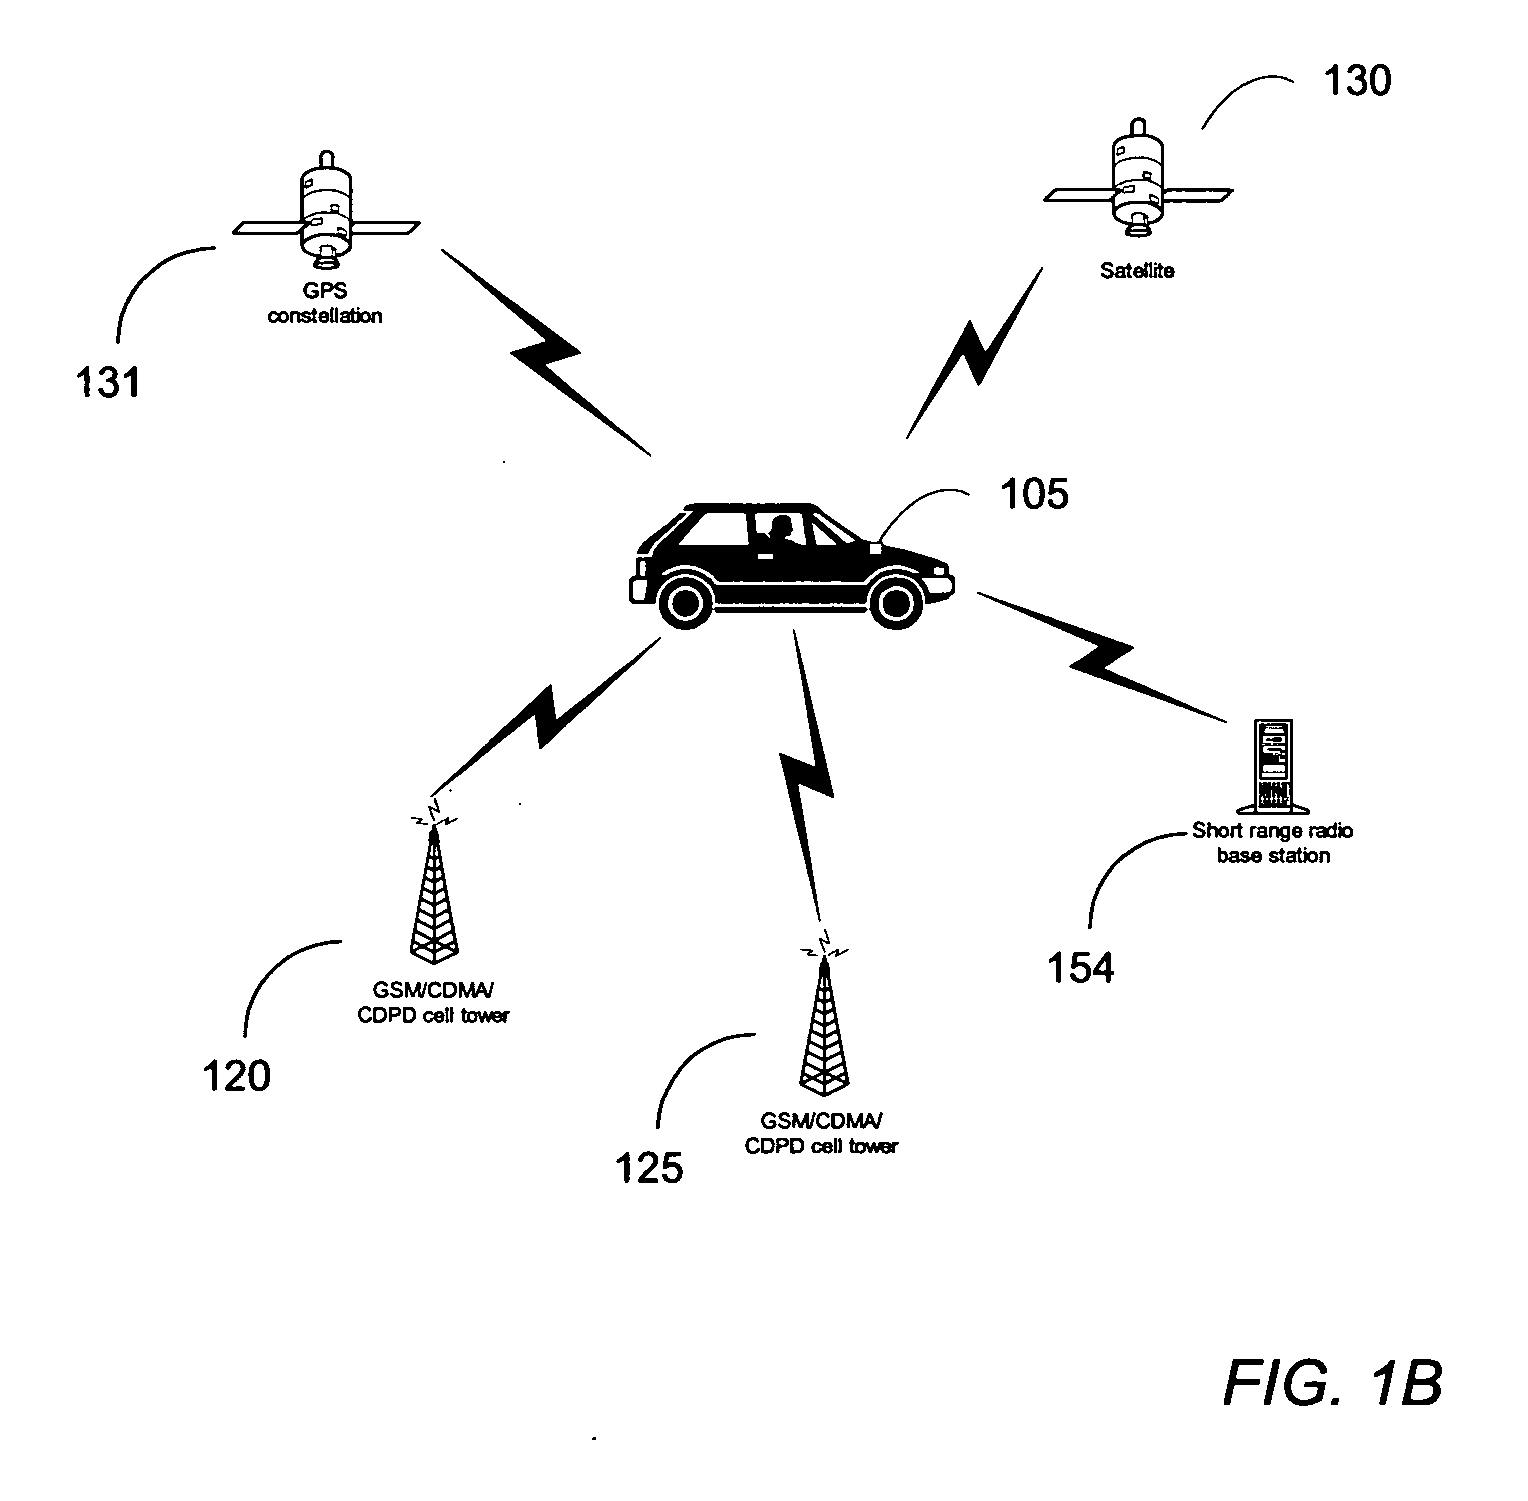 Method and system to control movable entities